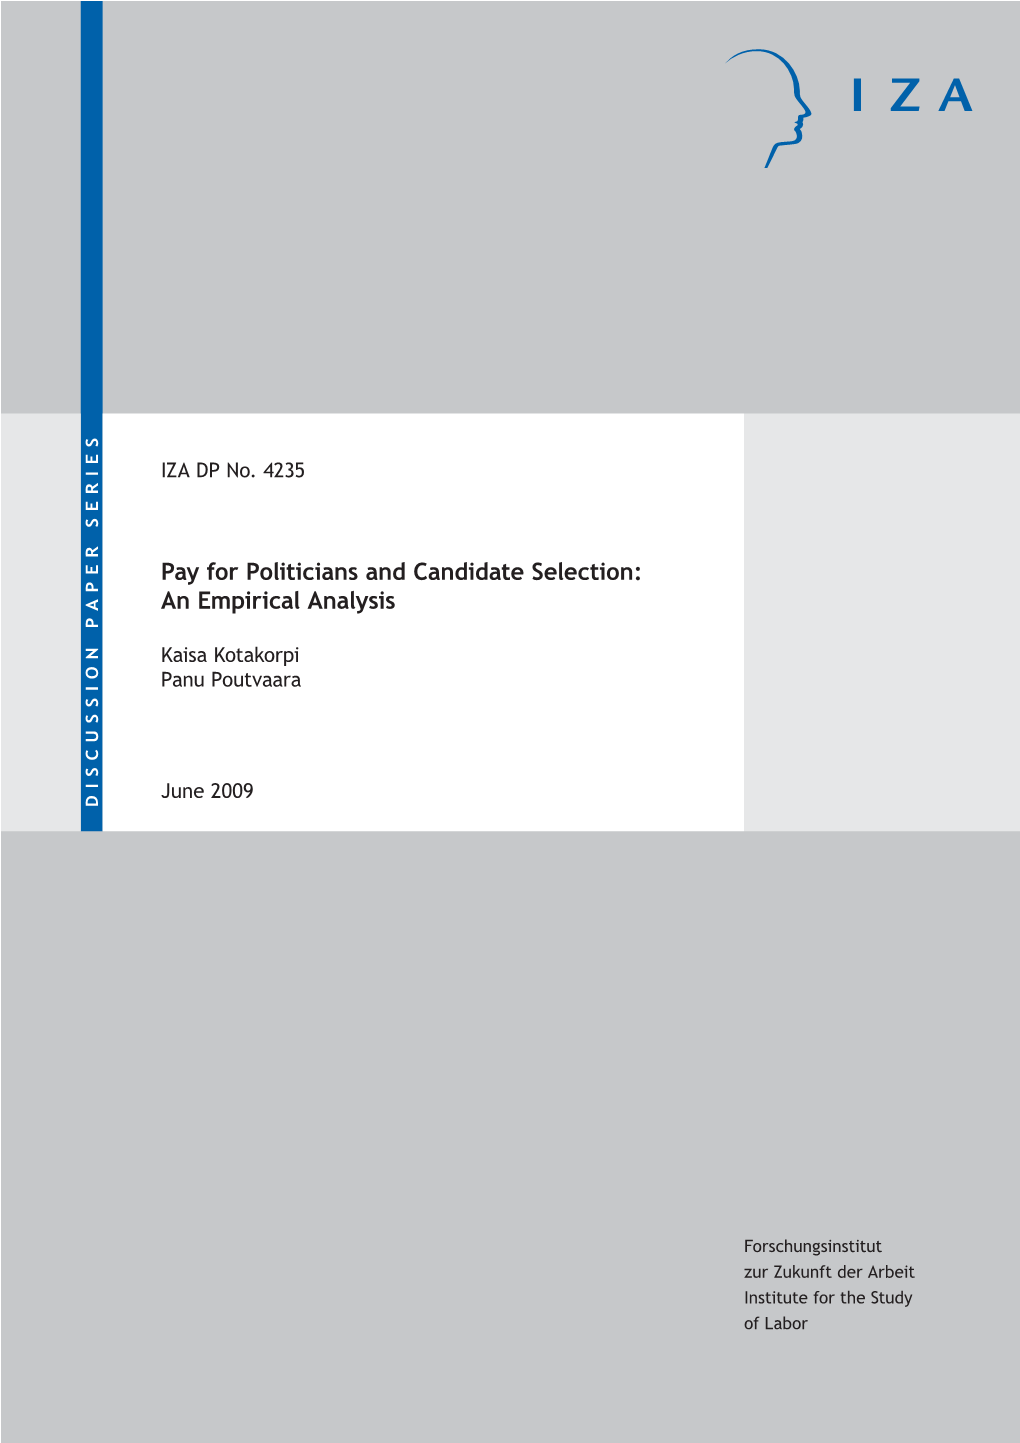 Pay for Politicians and Candidate Selection: an Empirical Analysis